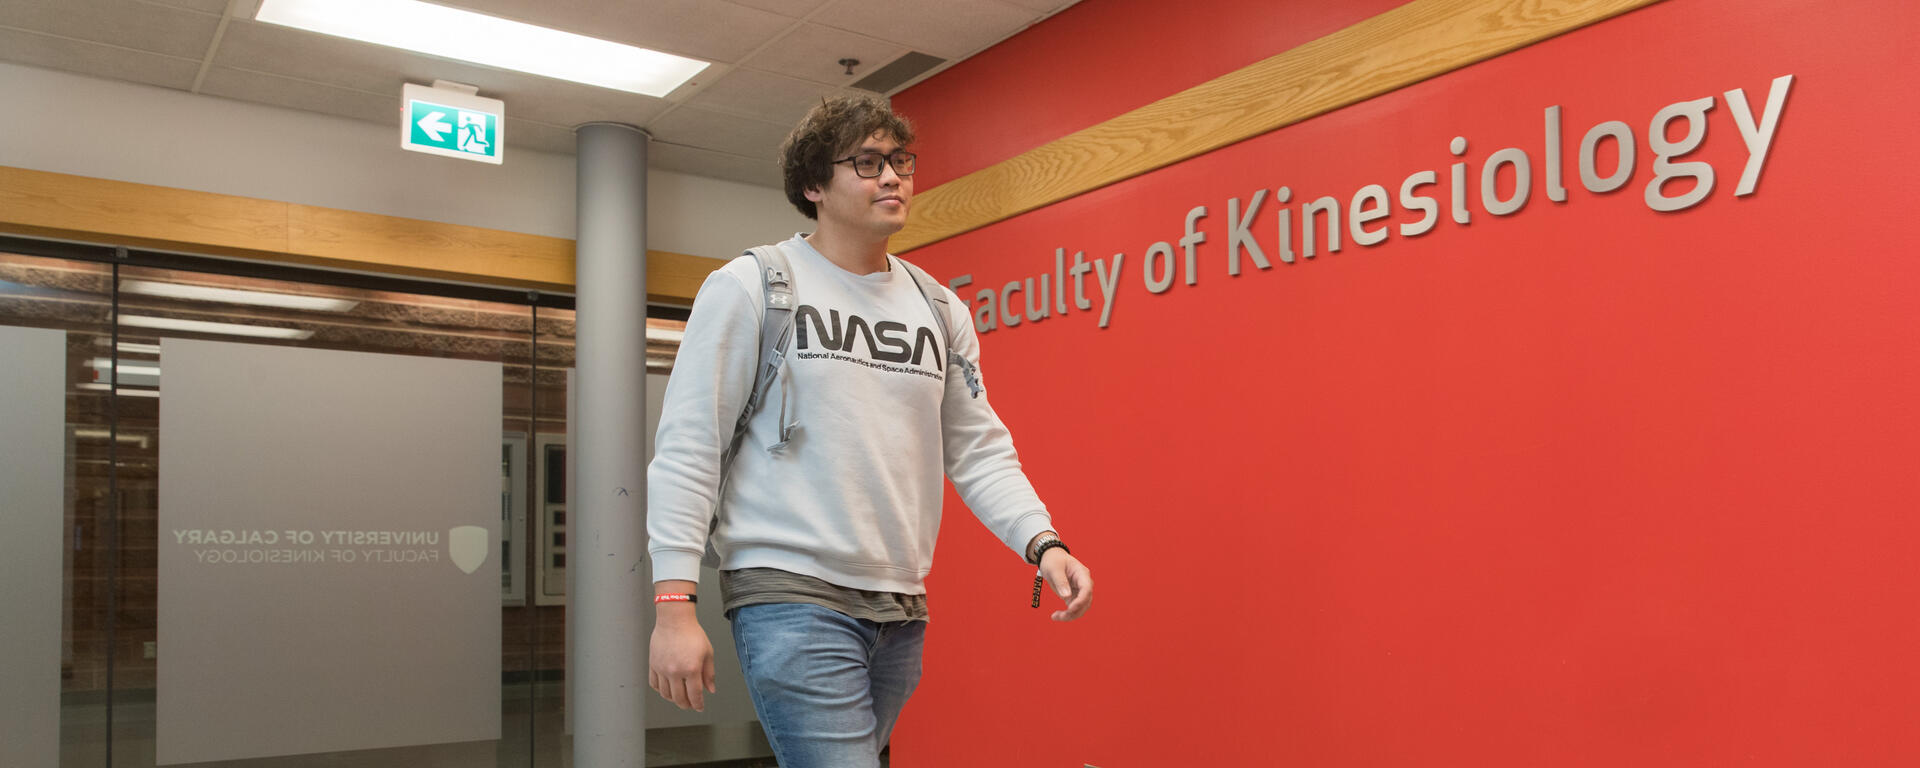 A student walking past faculty of kinesiology sign